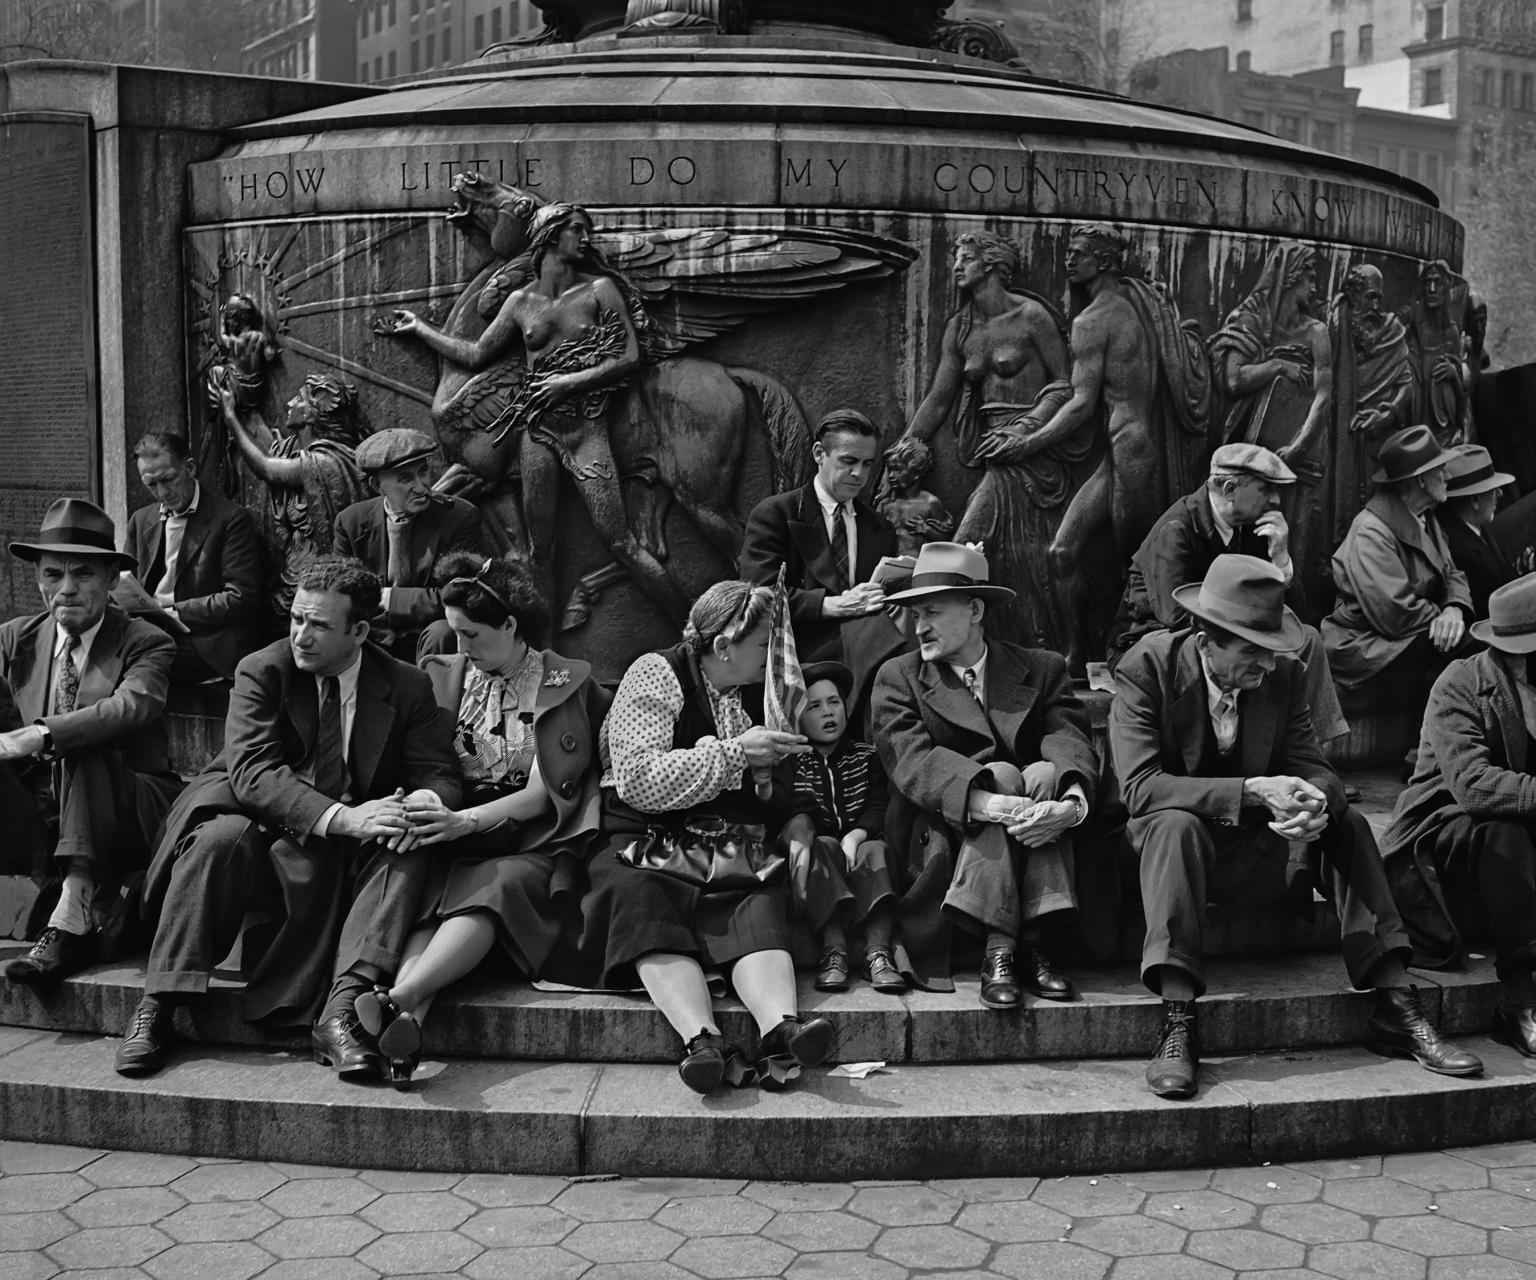 Photograph of men, women, and children seated on the steps of a large public monument with nude classical figures and a winged horse atop a circular base.